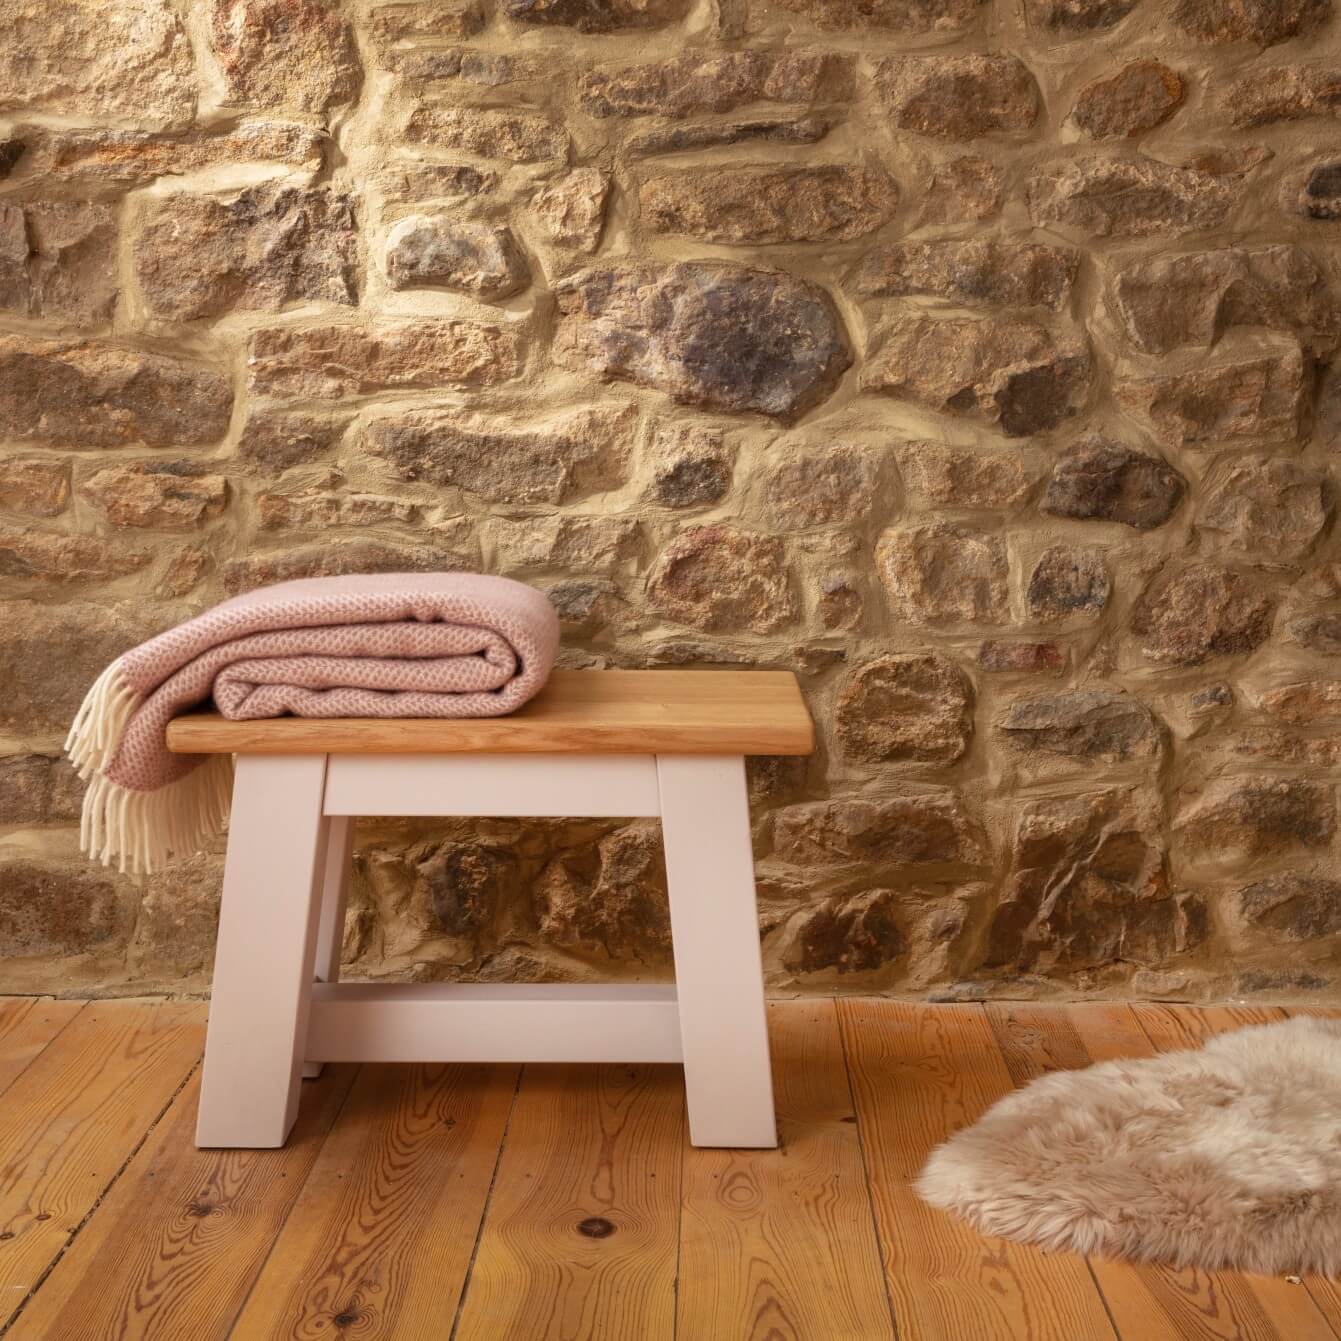 Image of Langley Oak Stool made in the UK by Funky Chunky Furniture. Buying this product supports a UK business, jobs and the local community